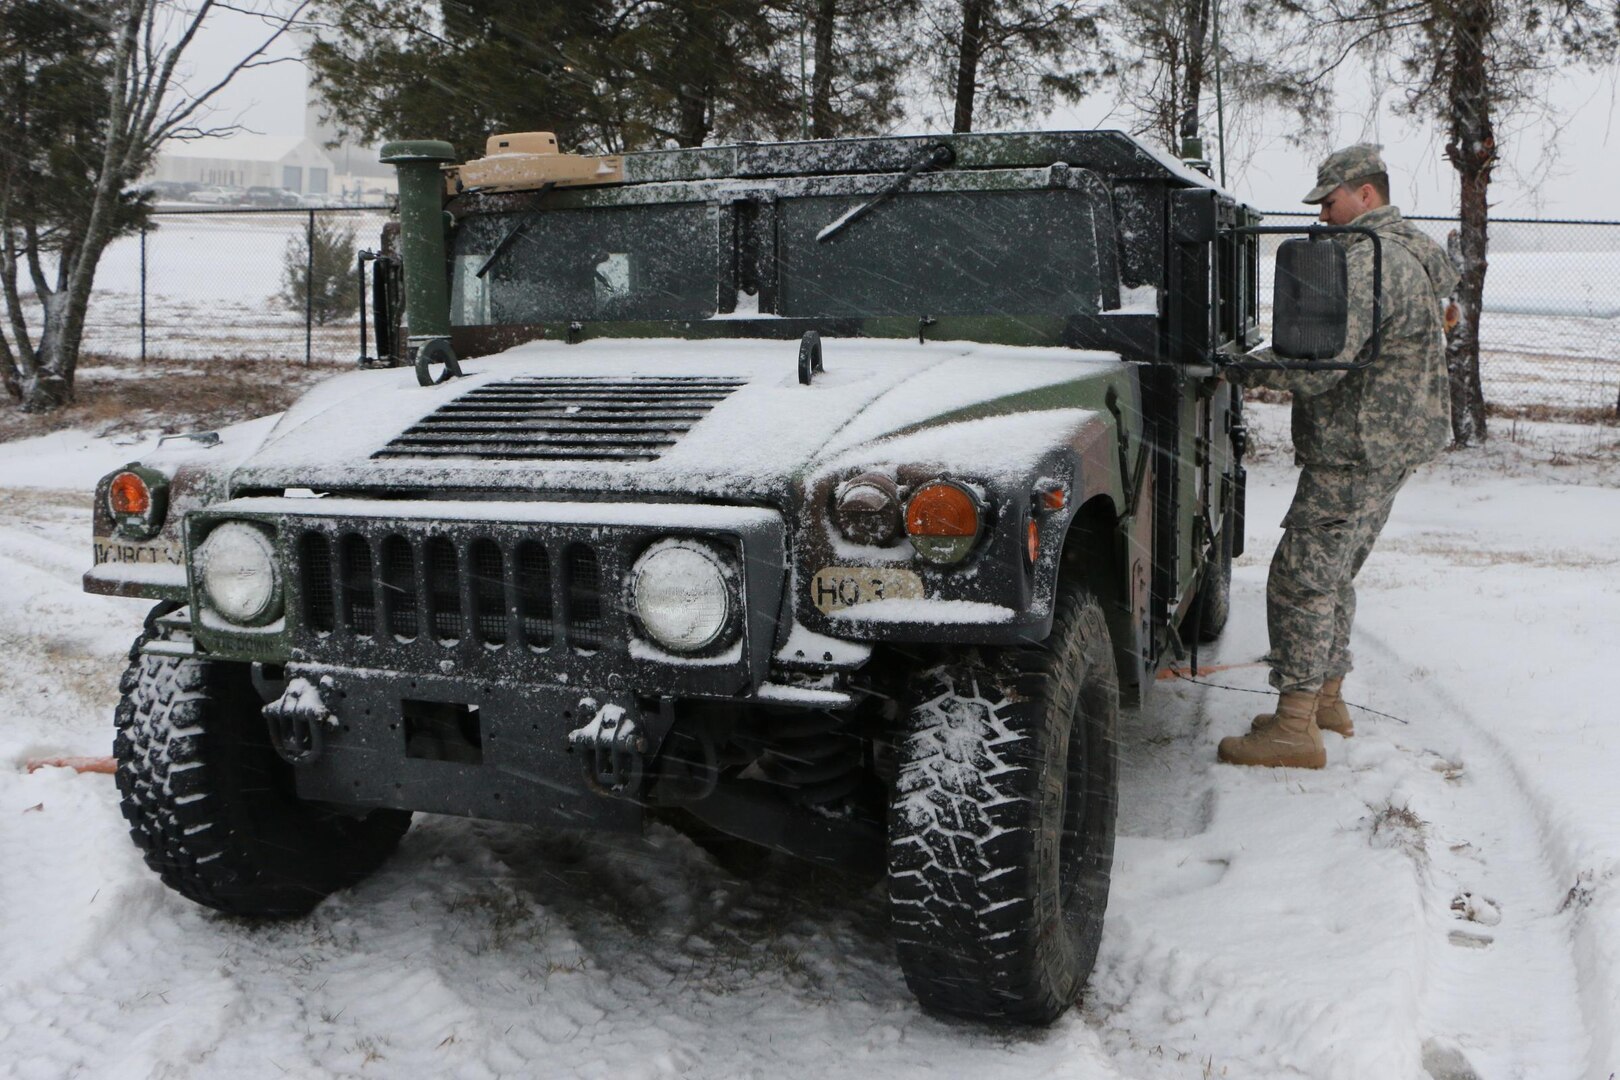 Soldiers from the Leesburg-based Company C, 3rd Battalion, 116th Infantry Regiment, 116th Infantry Brigade Combat Team prepare for possible winter storm response operations March 5, 2015, in Leesburg, Virginia. The Virginia Guard alerted approximately 70 Soldiers March 4, 2015, to stage and be ready for possible response operations due to heavy snow or flooding. Soldiers from the Staunton-based 116th Infantry Brigade Combat Team will stage in Winchester, Staunton, Leesburg, Fredericksburg and Harrisonburg, and Soldiers from the Gate City-based 1030th Transportation Battalion will stage in Gate City.